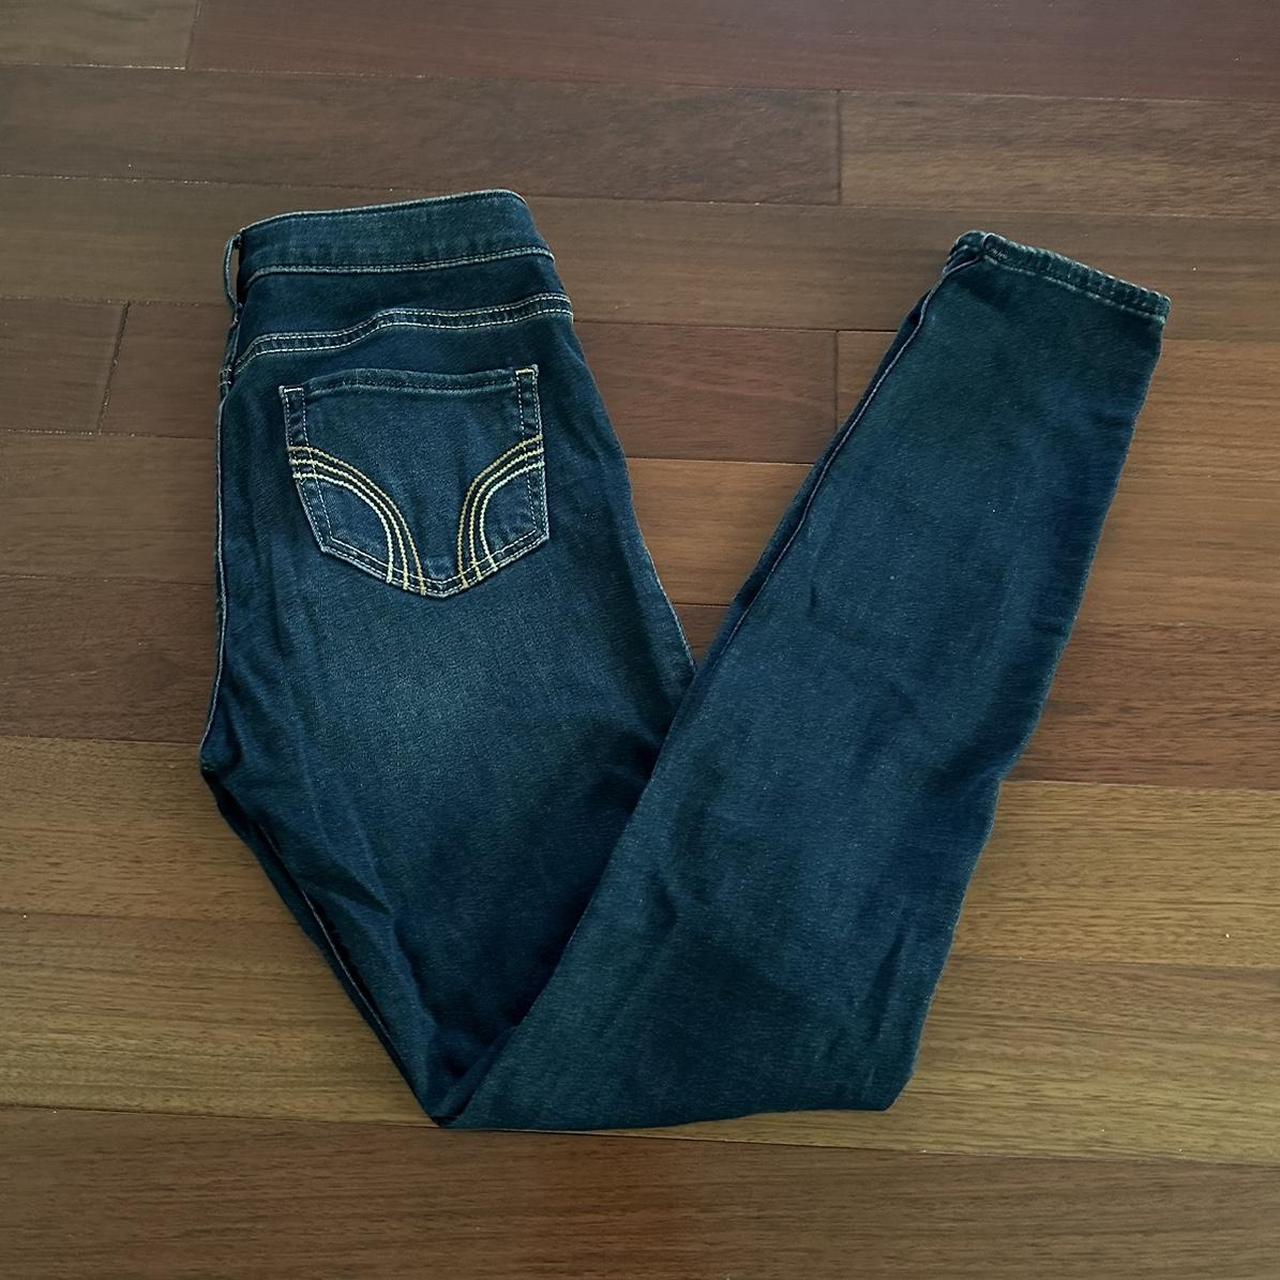 Hollister Jeggings Blue Size 25 - $12 (76% Off Retail) - From Delaney